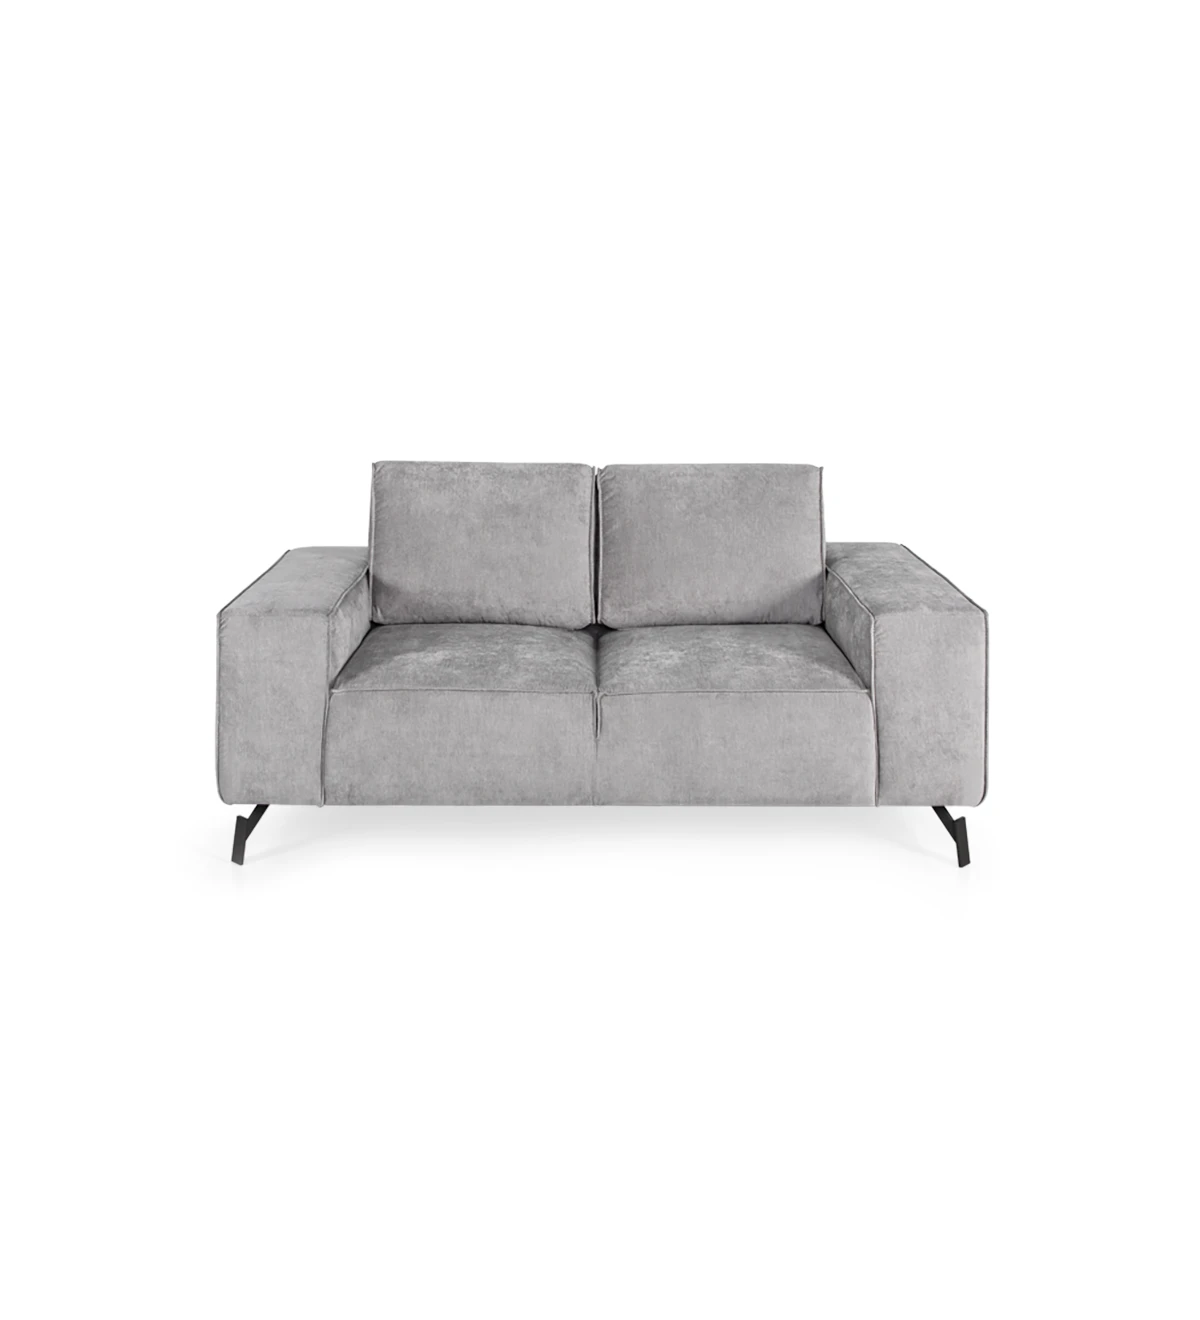 Tokyo 2-seater sofa upholstered in gray fabric, black lacquered metal feet, 191 cm.